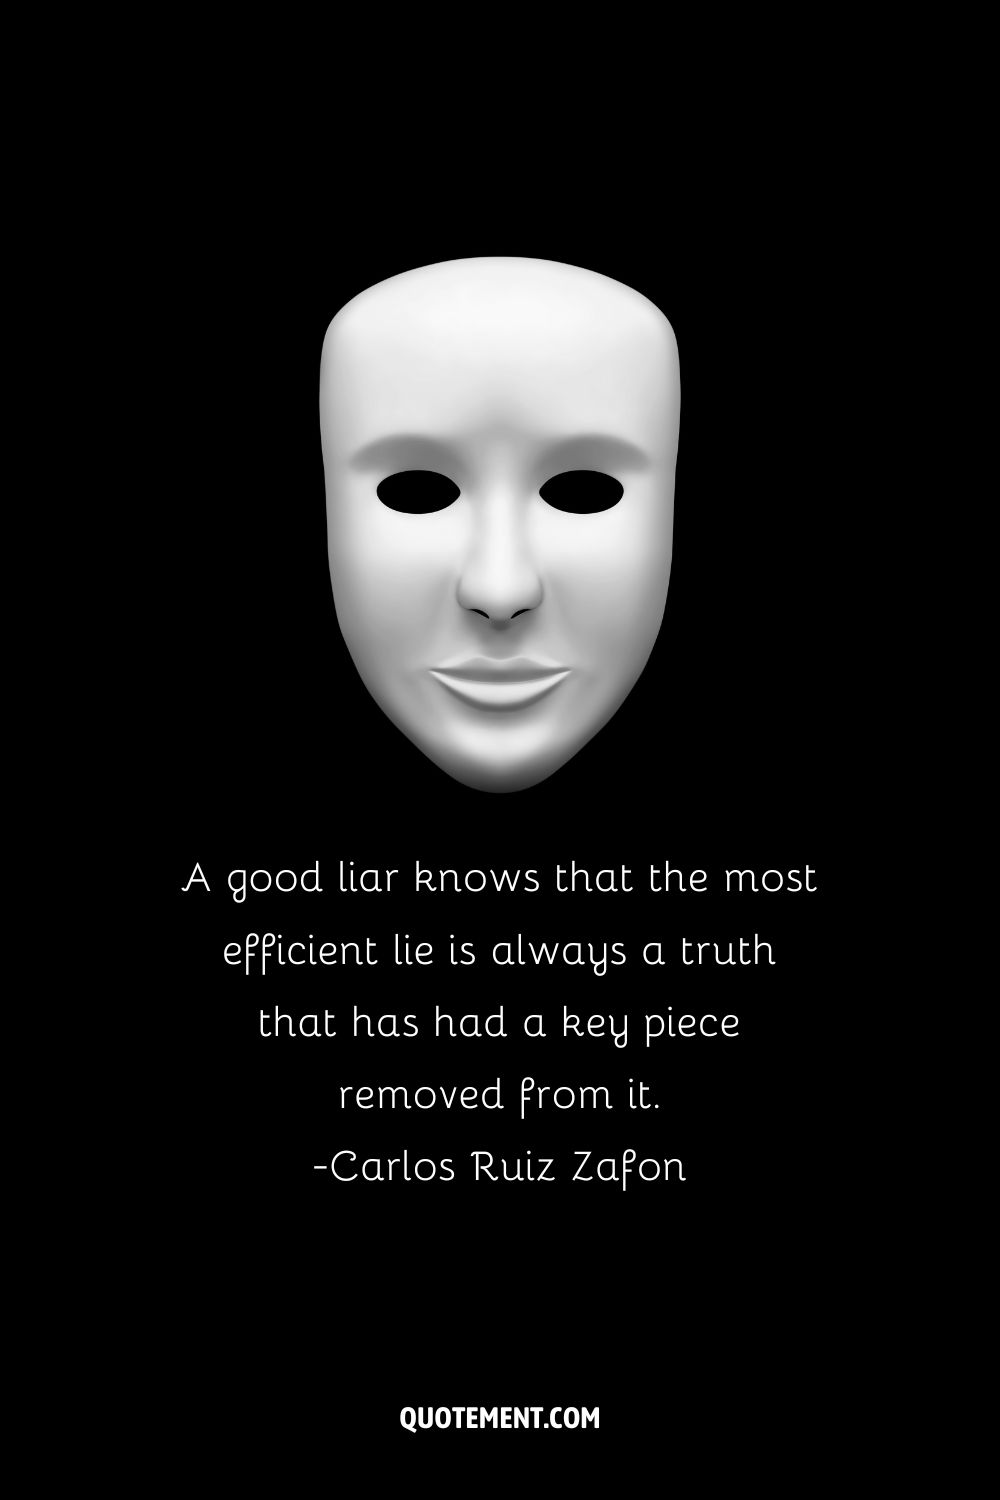 A good liar knows that the most efficient lie is always a truth that has had a key piece removed from it